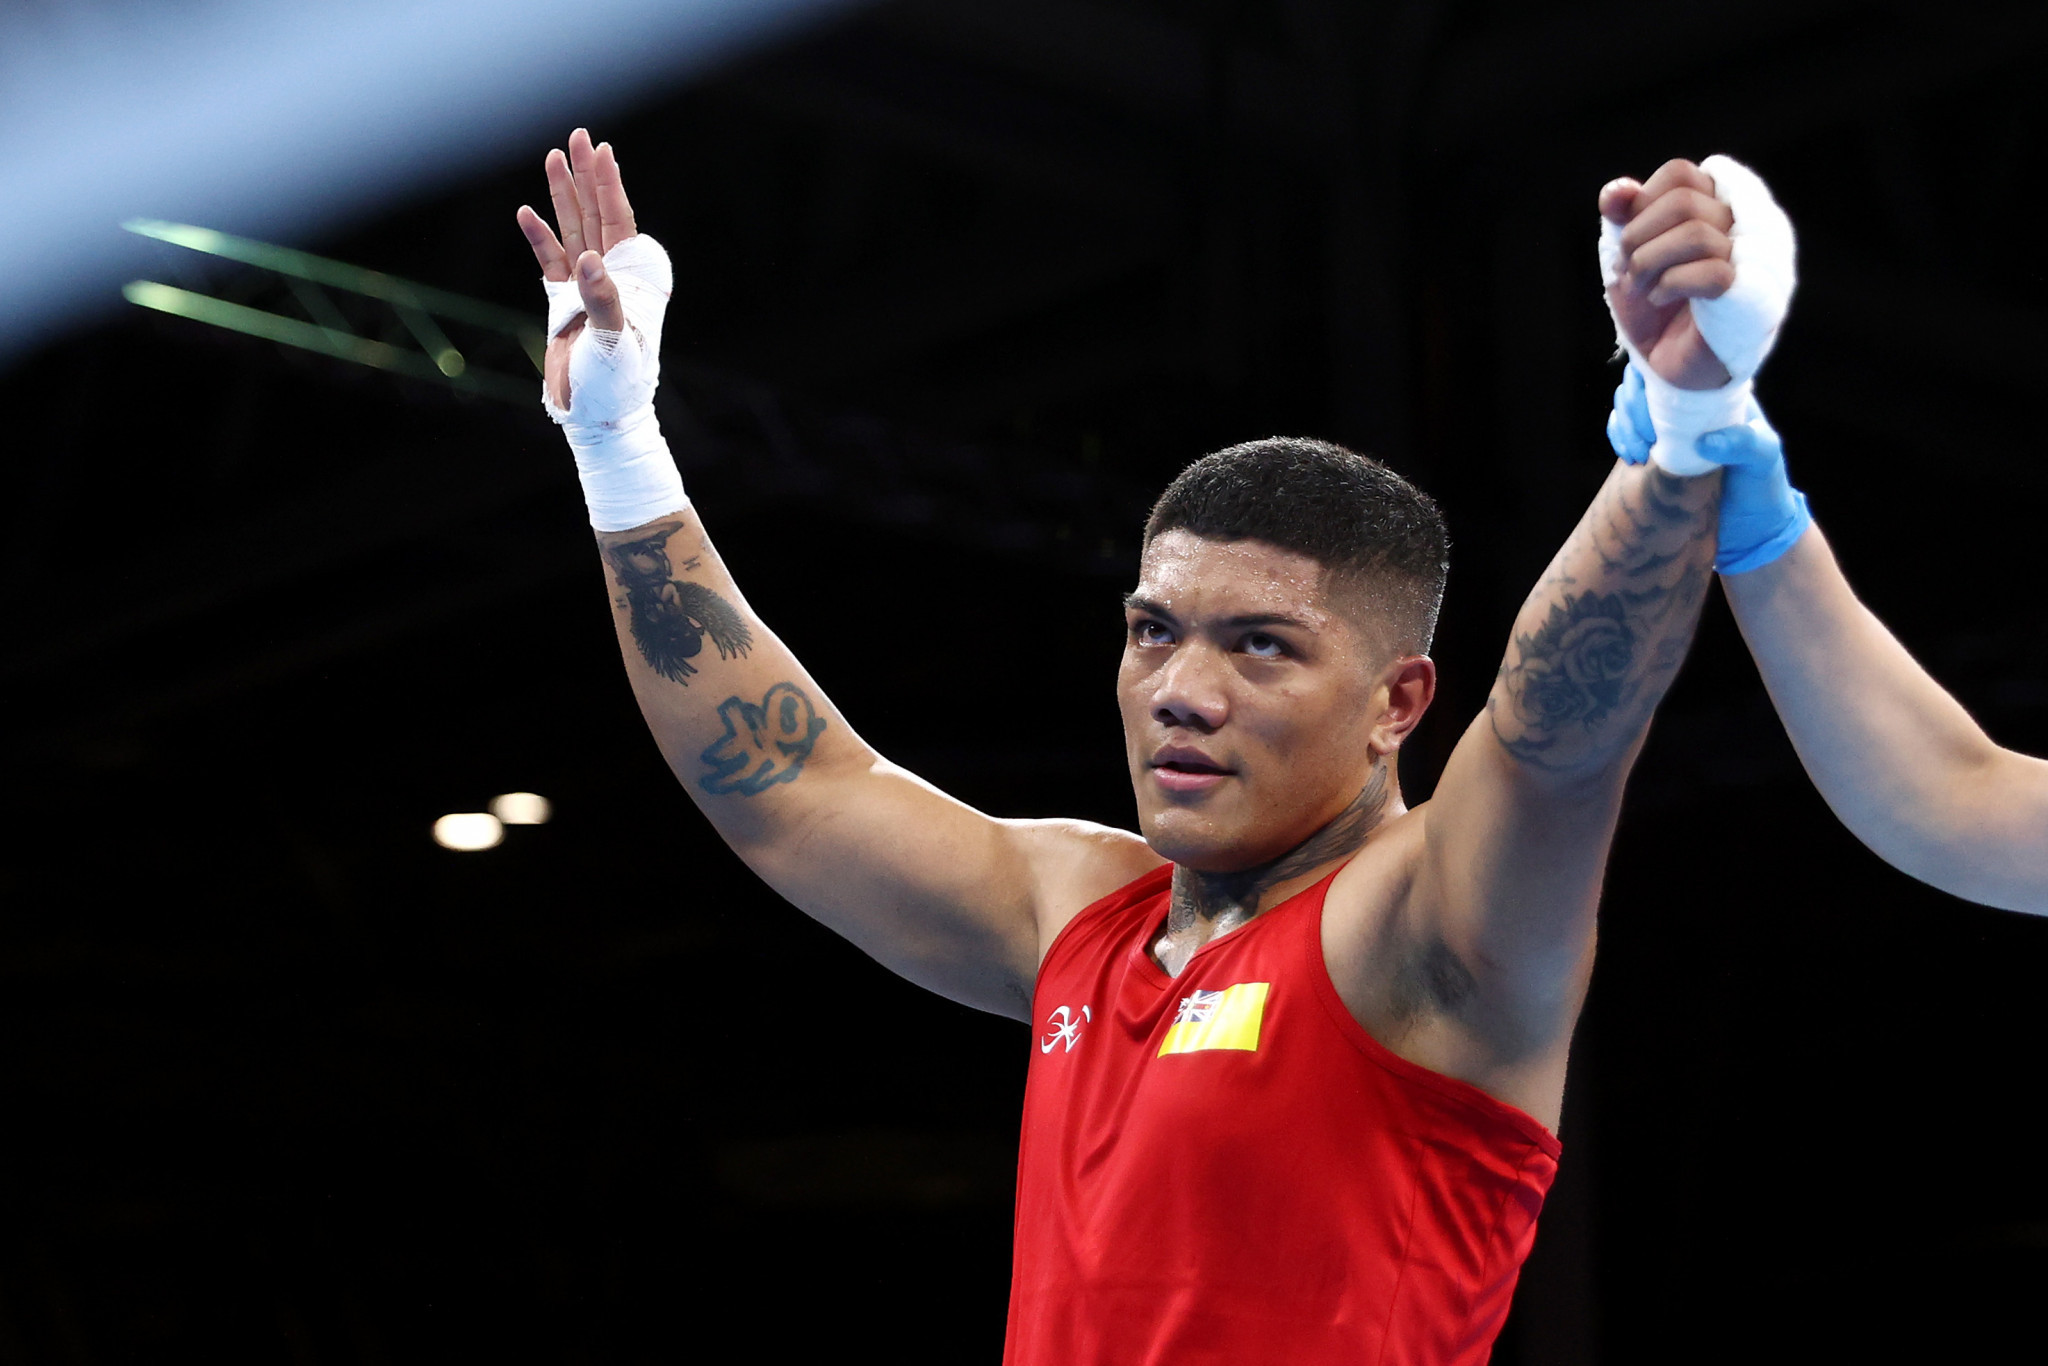 Niue guaranteed first Commonwealth medal with boxing win at Birmingham 2022